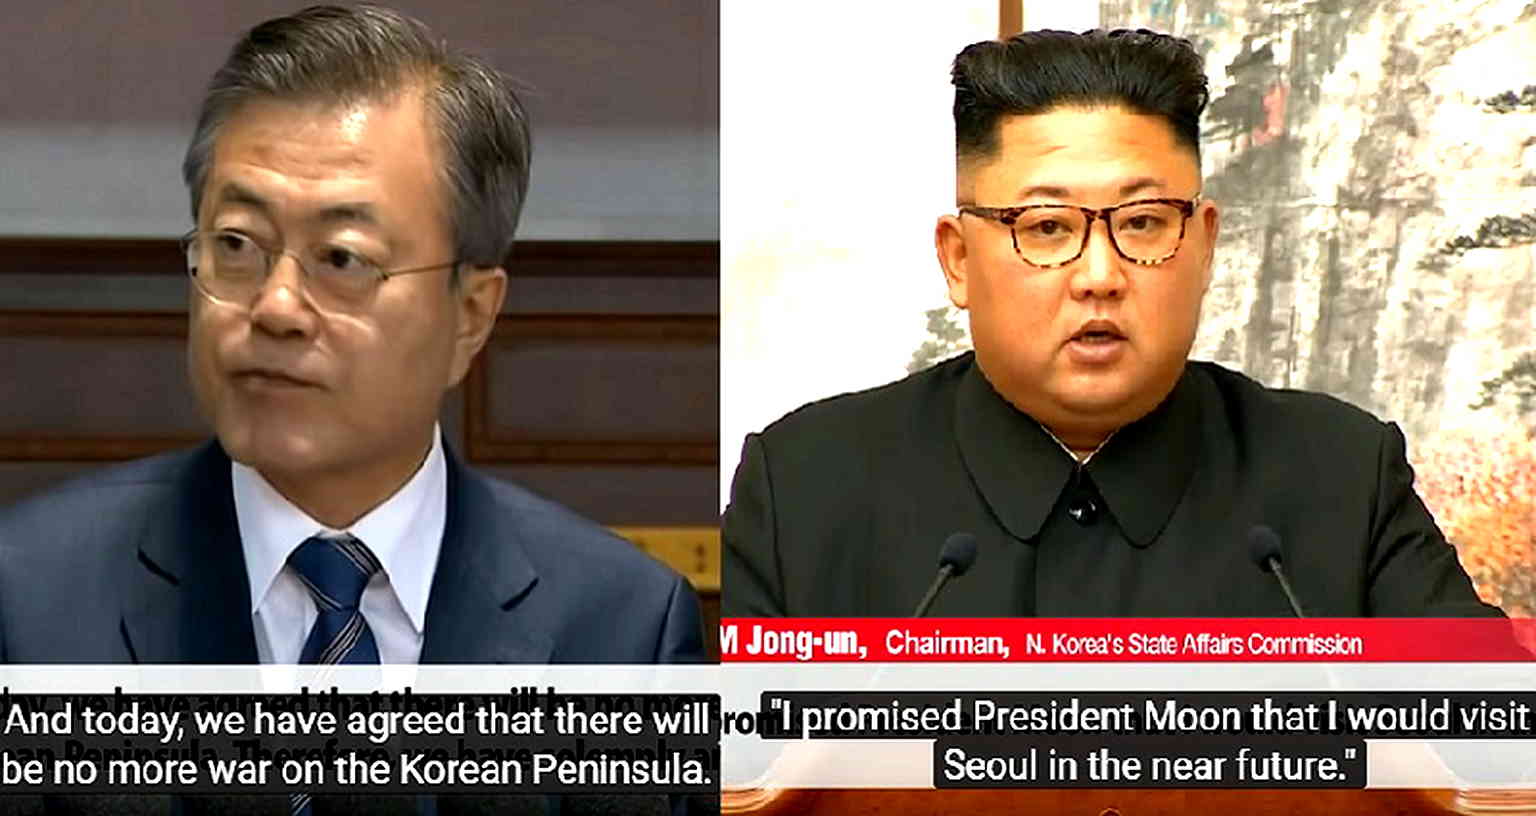 North and South Korea Sign Agreement for ‘Era of No War,’ Will Cease All Hostile Acts